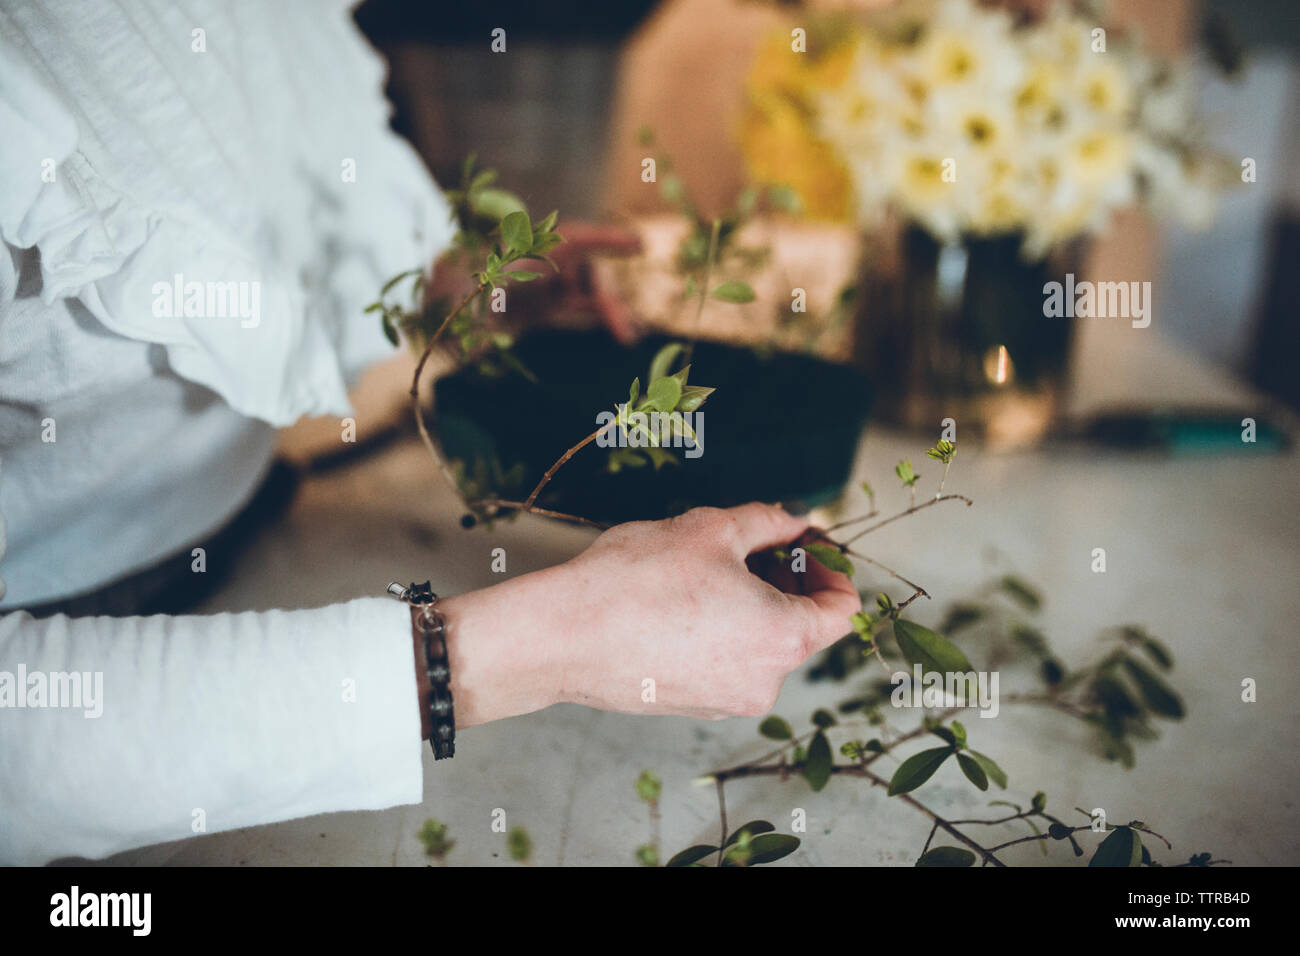 Cropped image of florist arranging plant stems on floral foam at flower shop Stock Photo